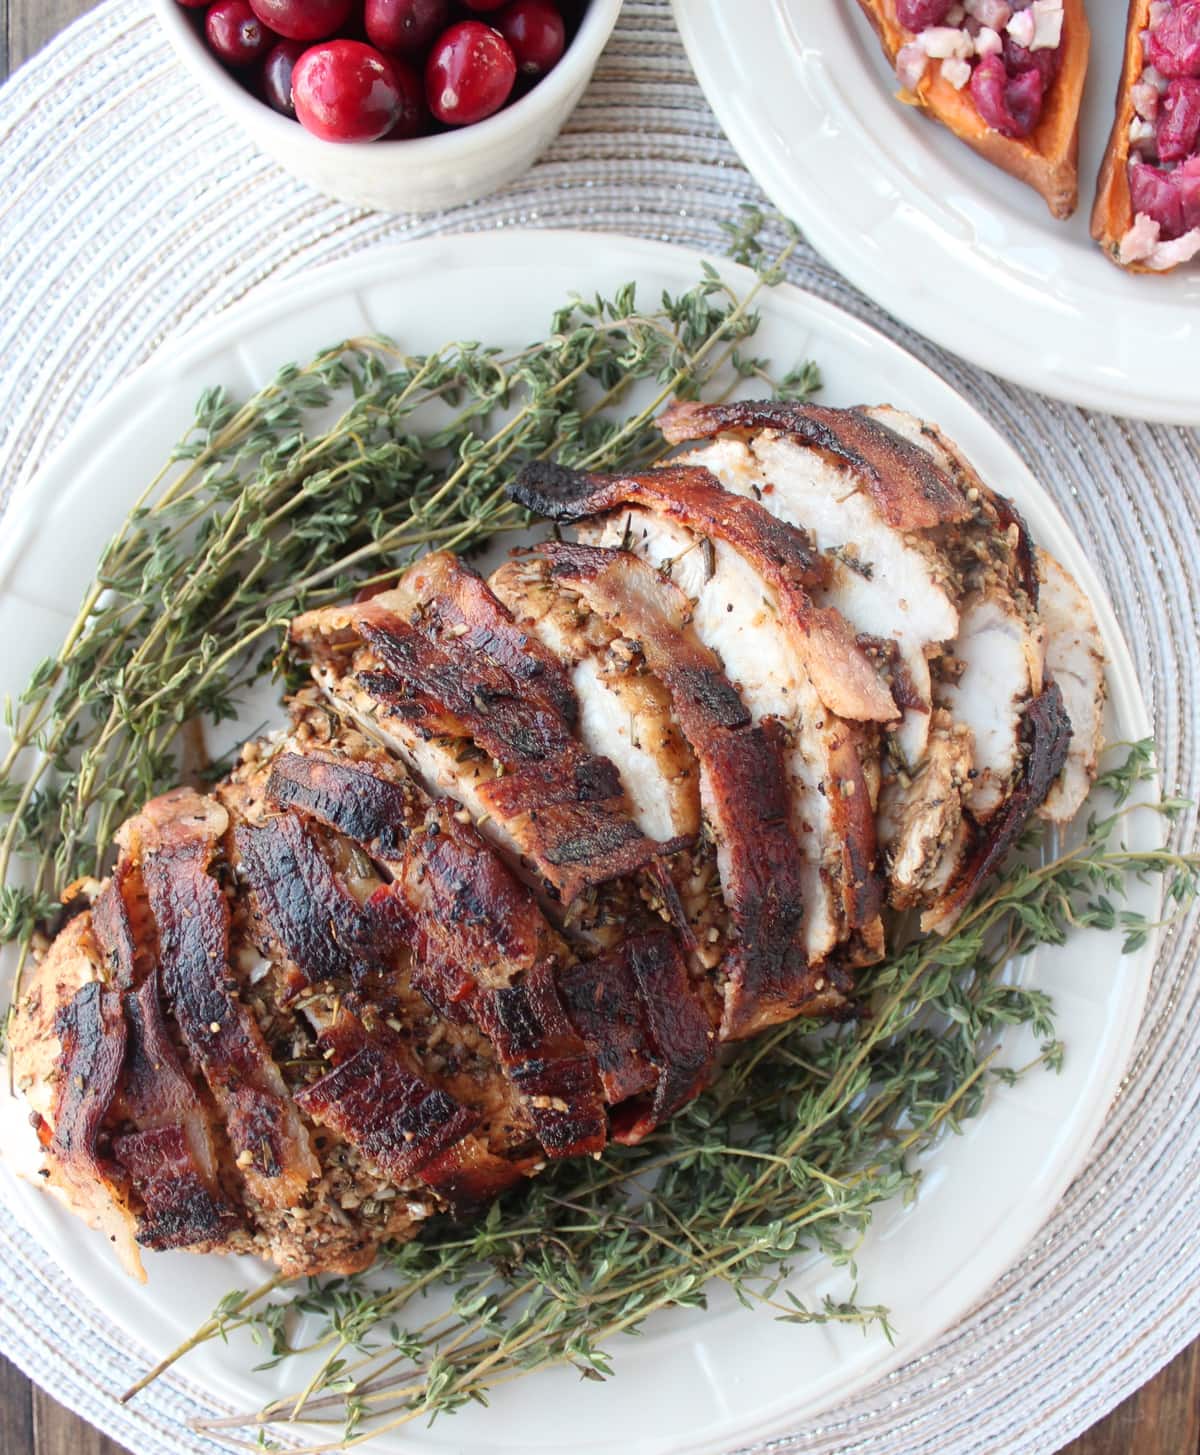 Bacon Wrapped Turkey Breast sliced on plate with fresh herbs